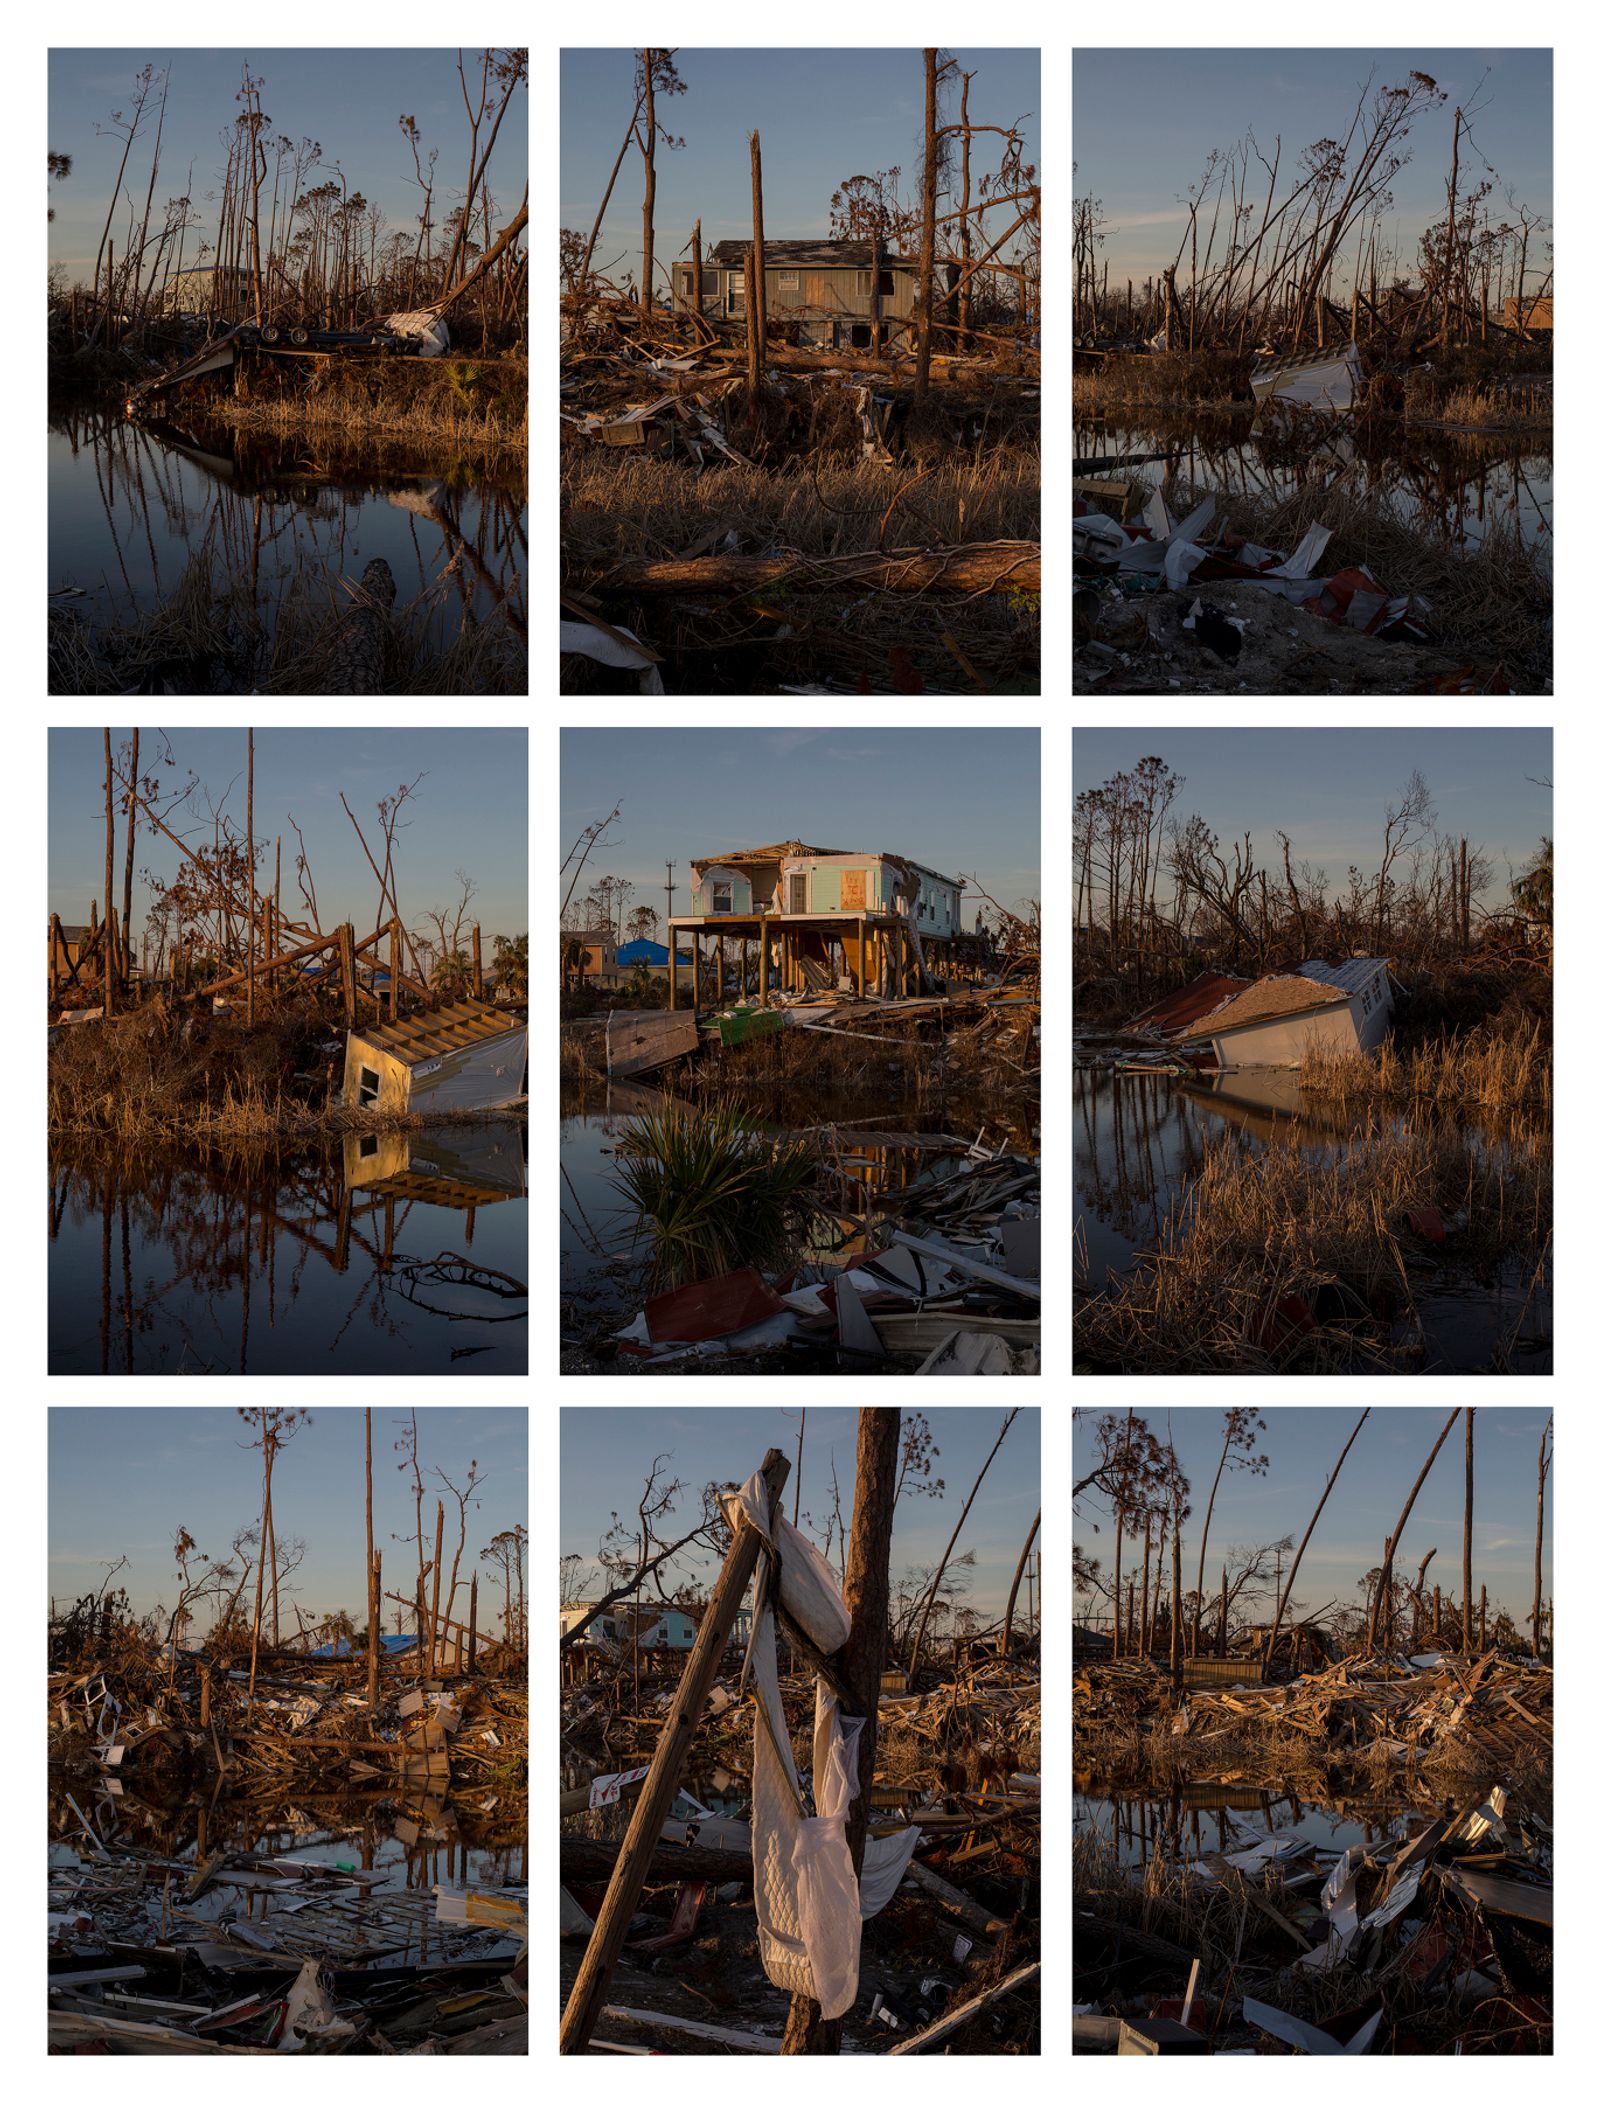 © Bryan Anselm - Mexico Beach homes along an inlet which were completely destroyed by Hurricane Michael on November 18, 2018.